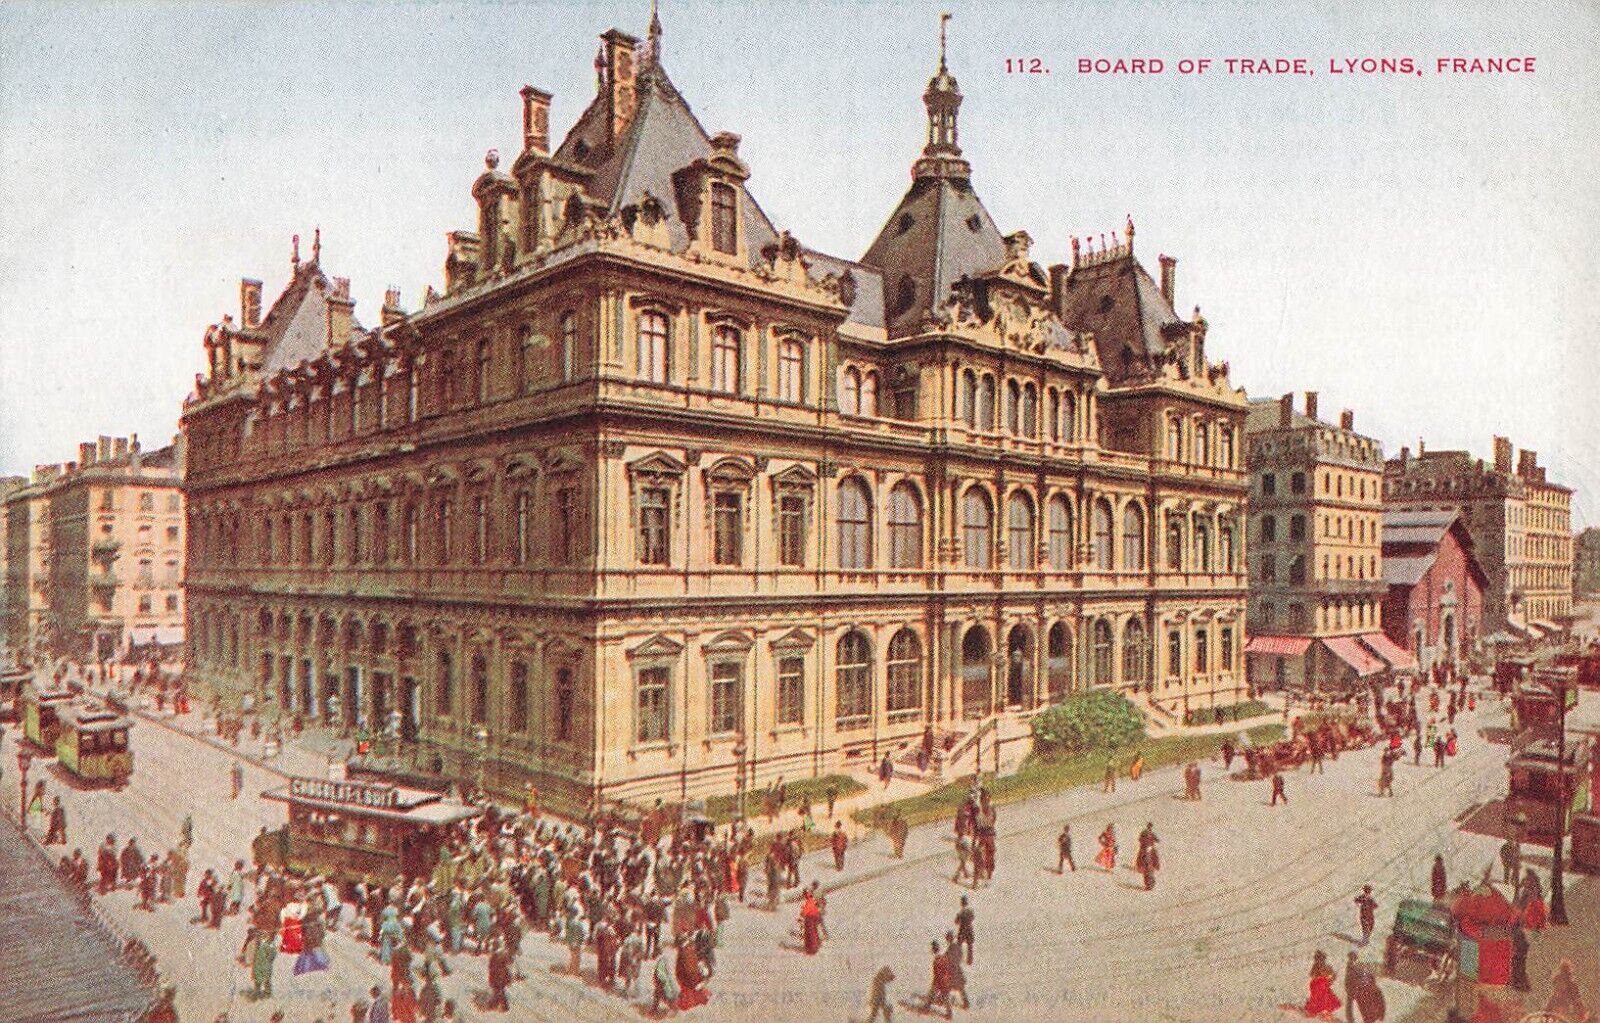 Postcard Lyons, France: Aerial View Board of Trade